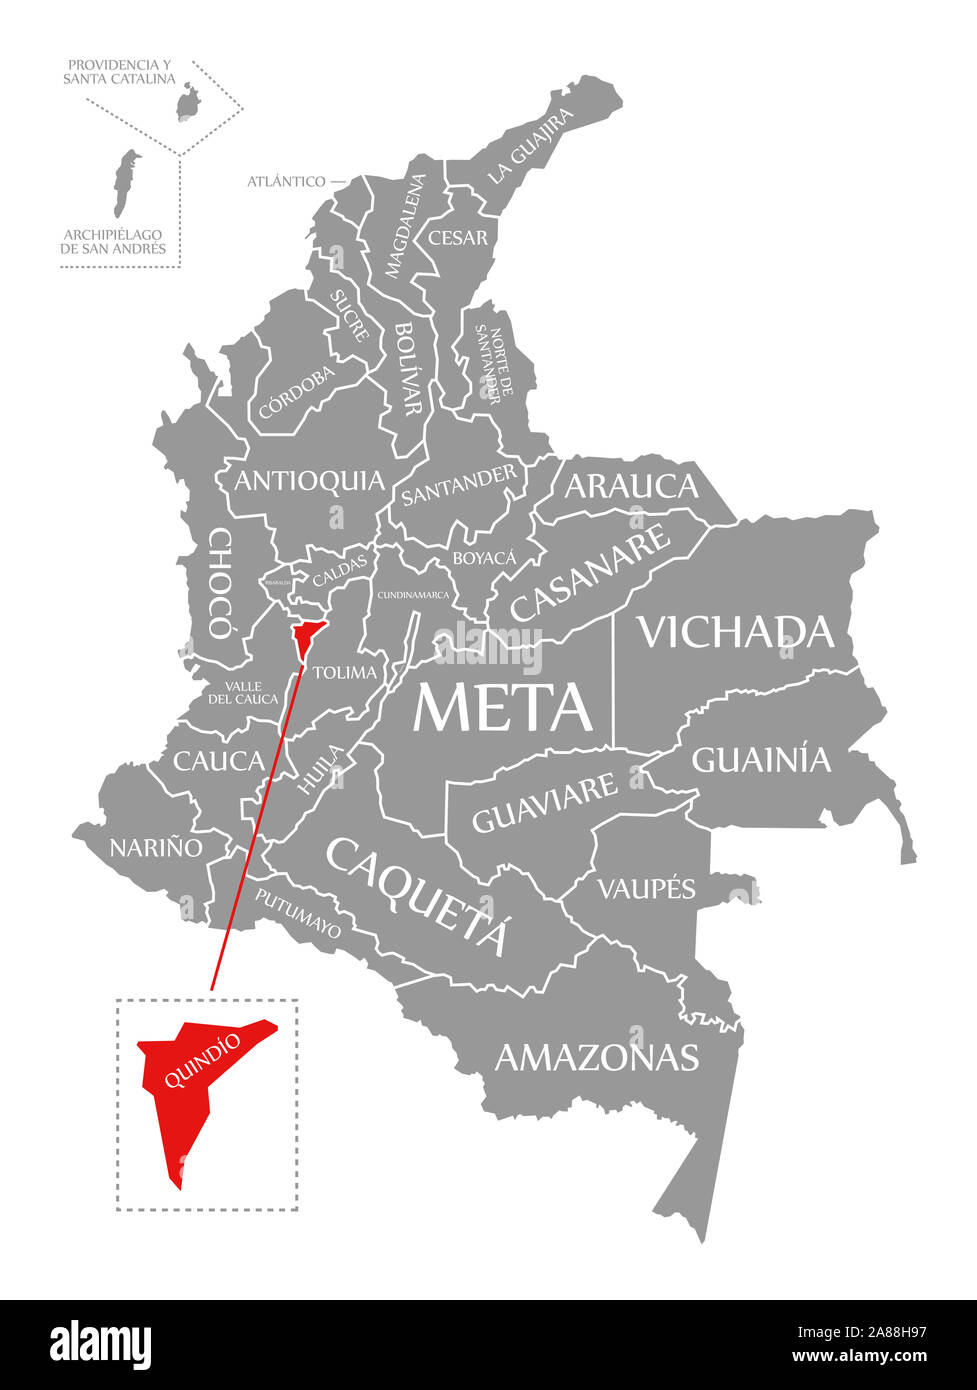 Quindio red highlighted in map of Colombia Stock Photo